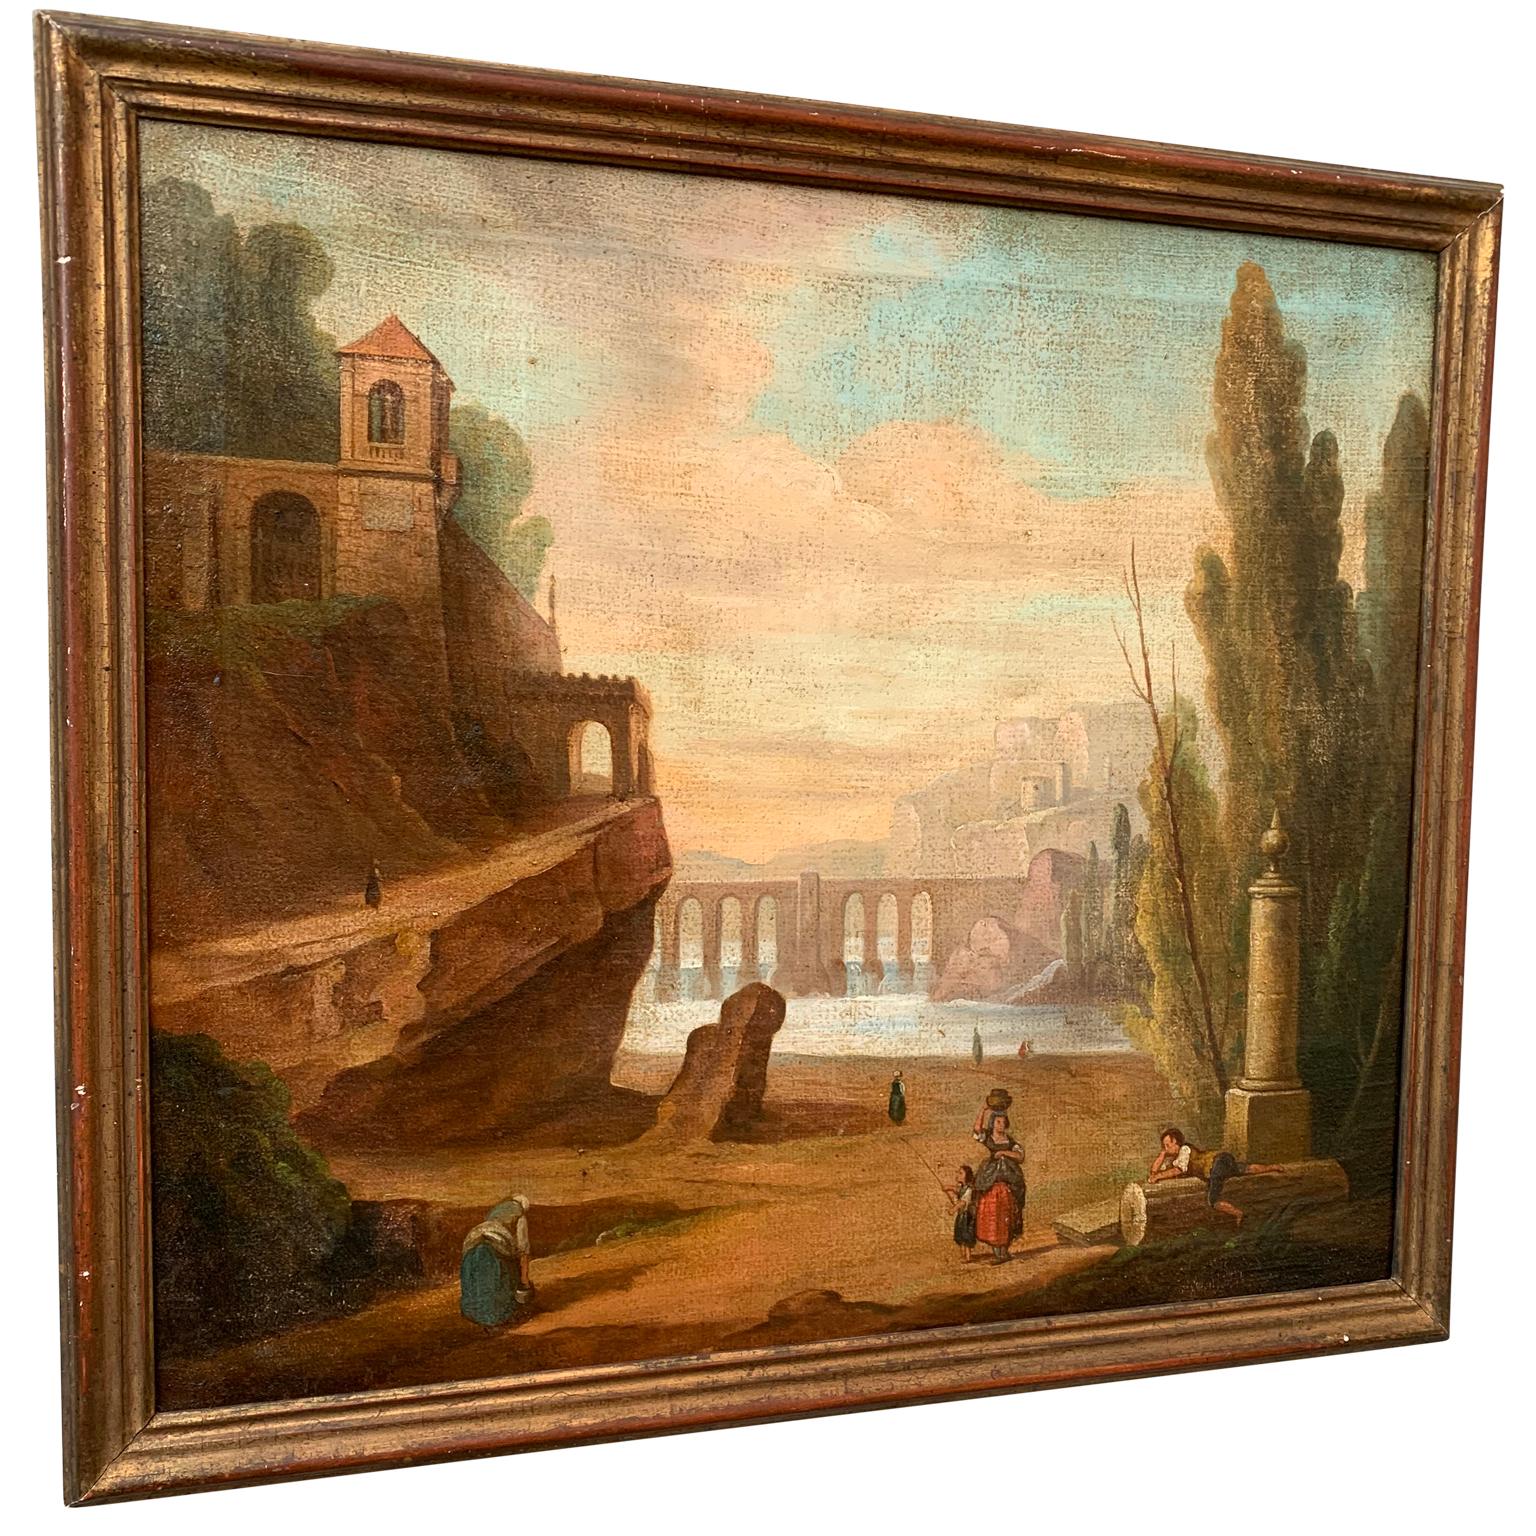 A 18th century oil painting on canvas representing an Italian aquedotto and ruins around Rome. Painting is illustrating working women and children playing in a romantic landscape by a lake.